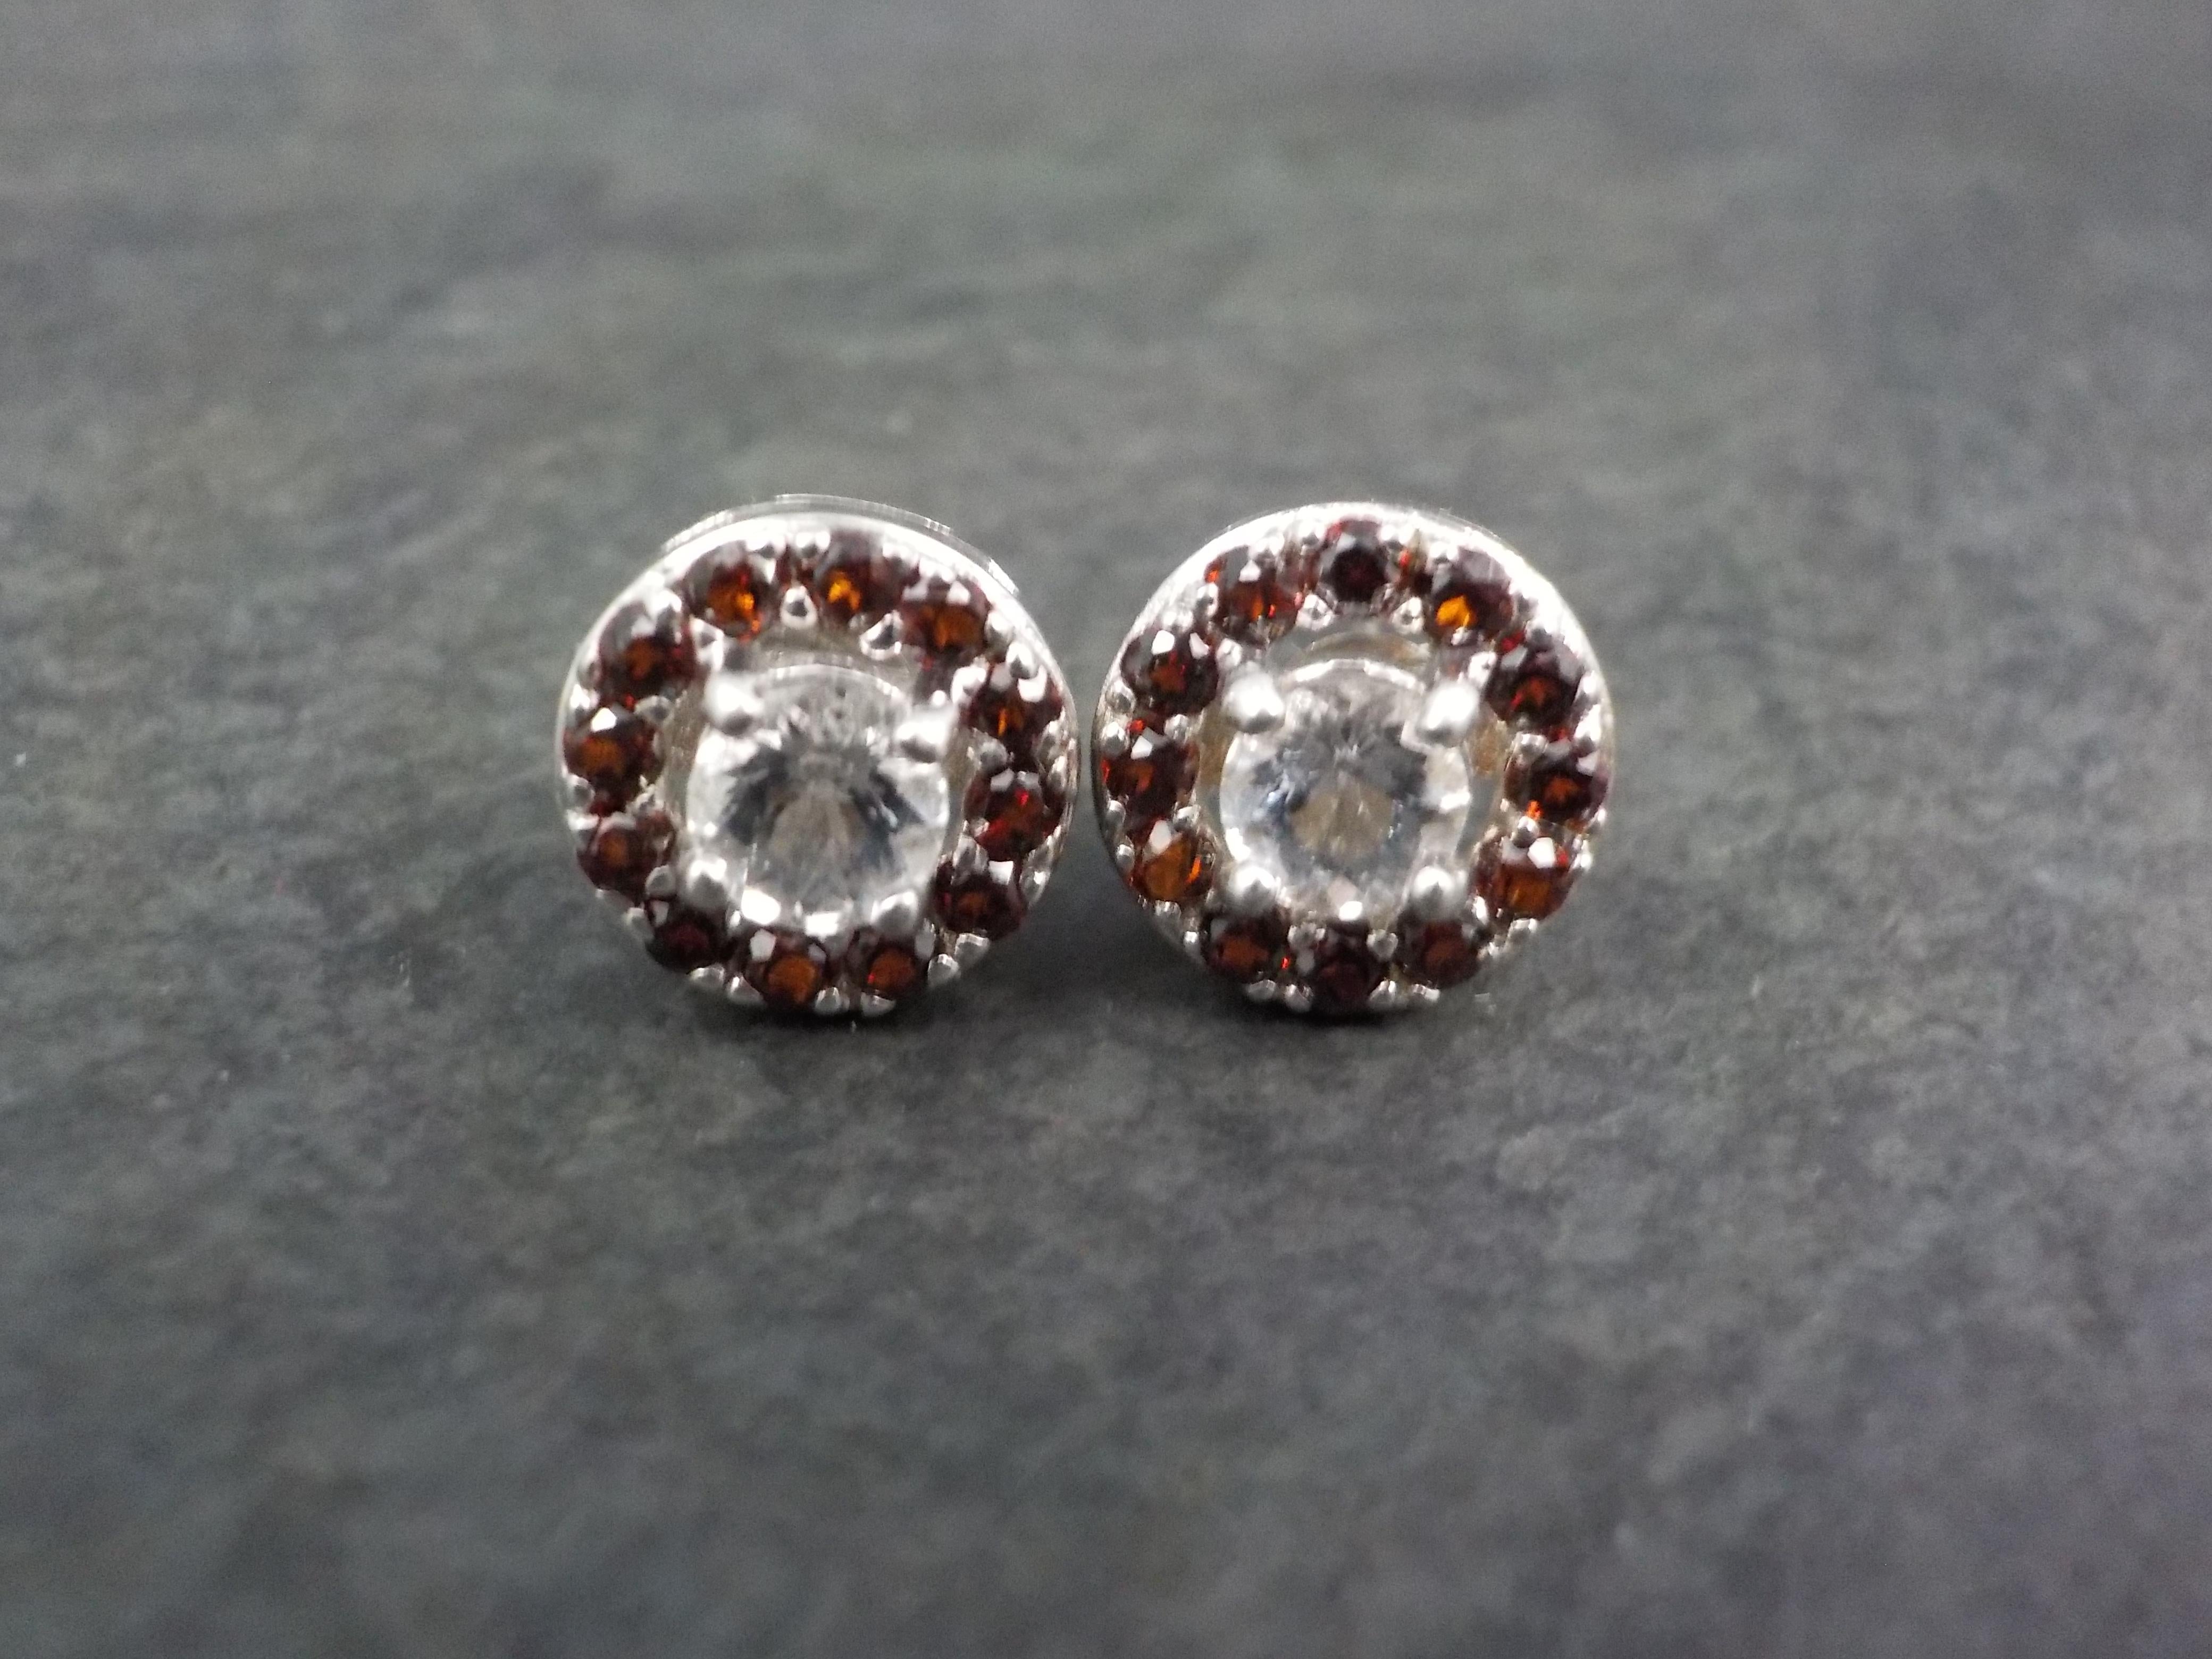 Round Cut Quartz and Garnet Halo Stud Earrings Sterling Silver For Sale